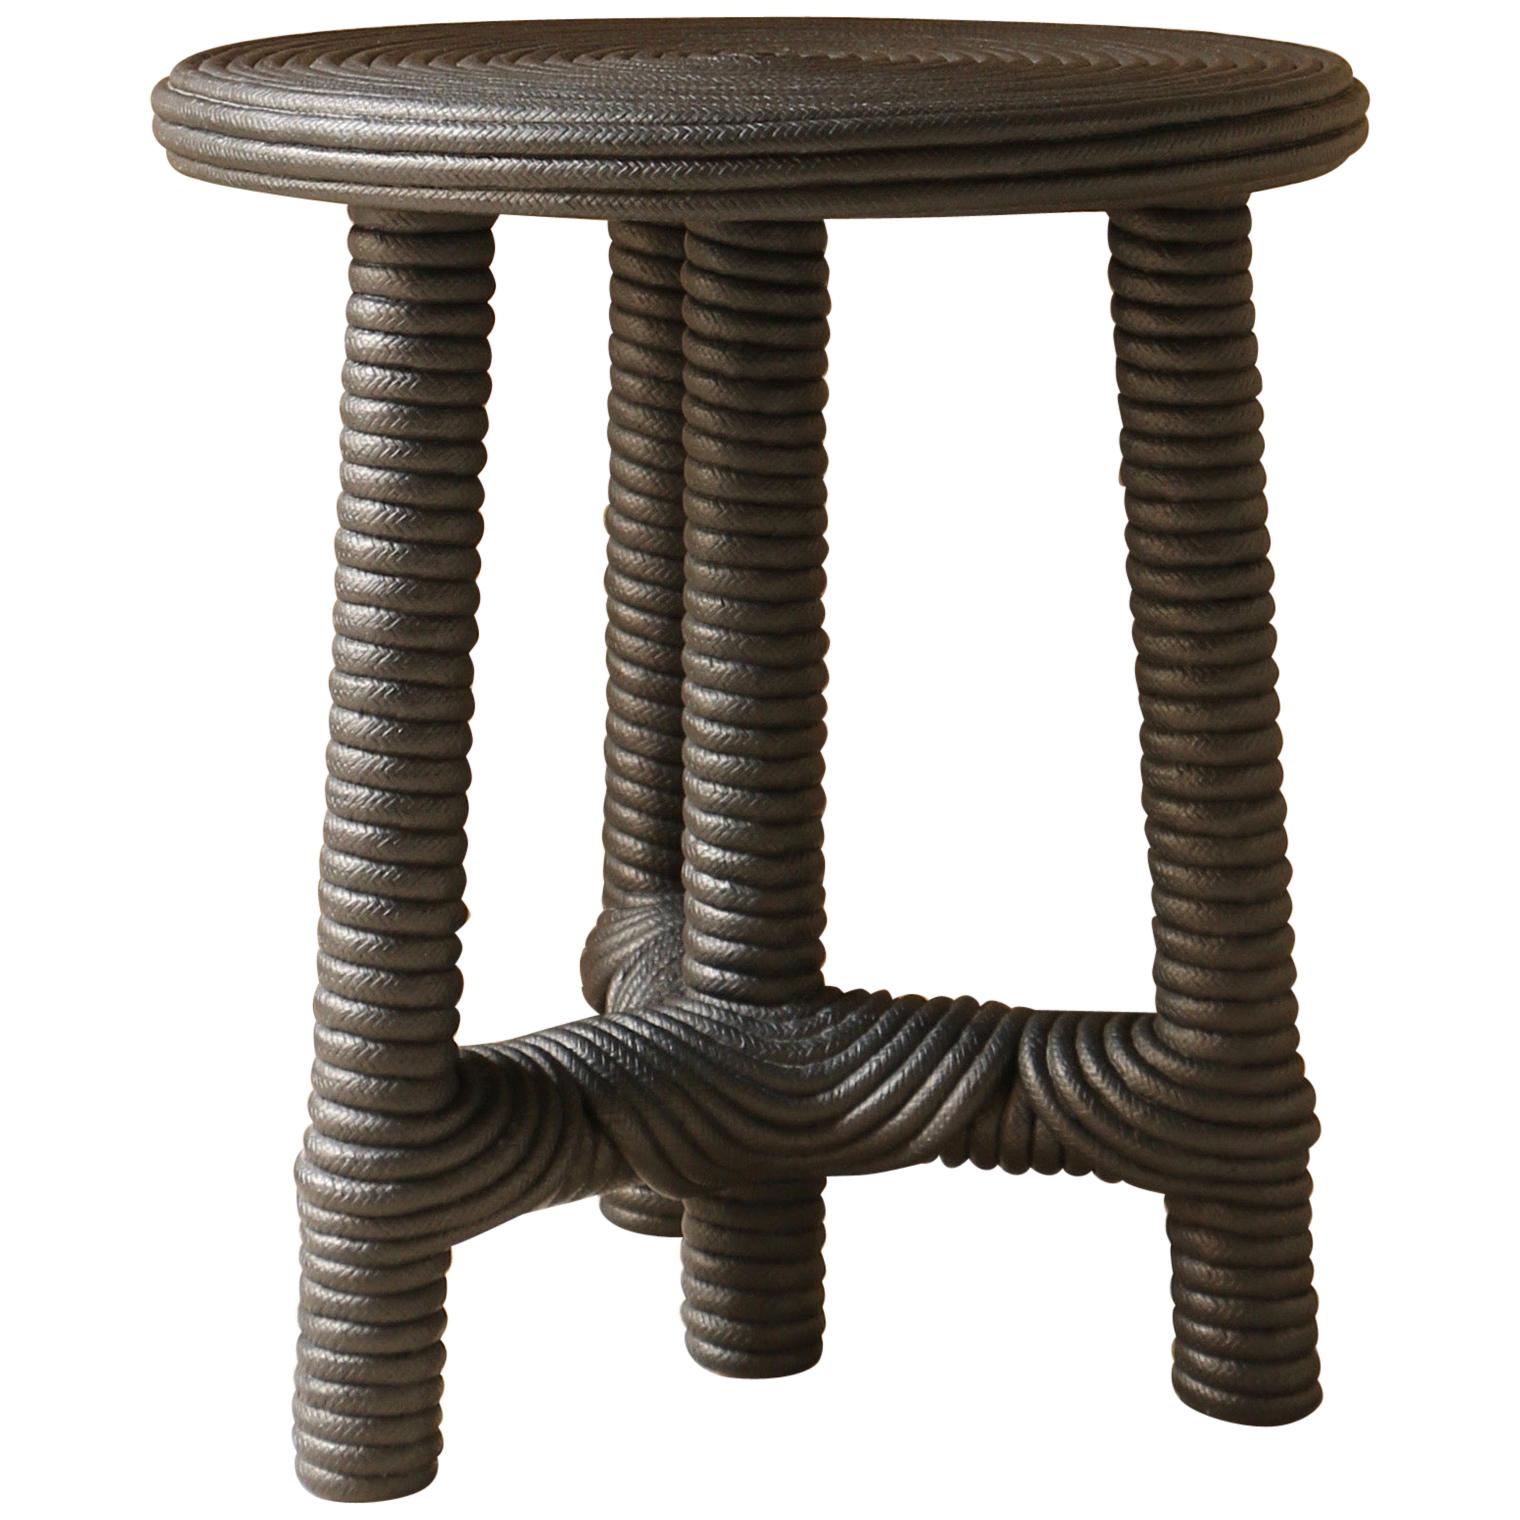 "Afrido" Stool, Made of Black Cotton Rope, by Christian Astuguevieille